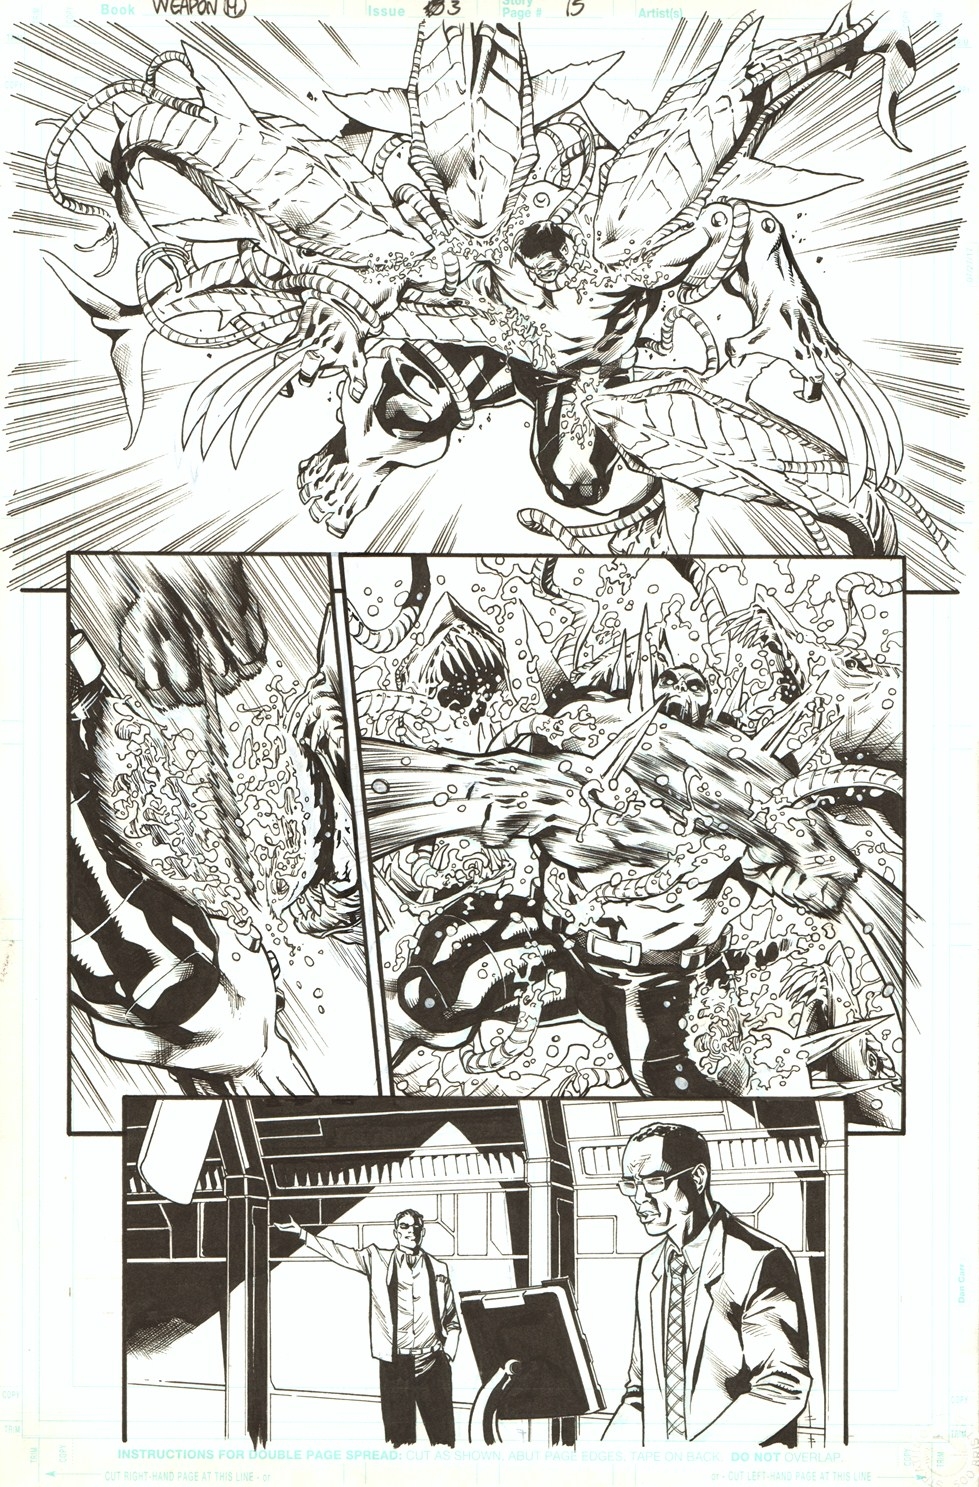 Weapon H #3 pg 15 by Cory Smith (ft Hulk/Wolverine hybrid), in K Gearon's  Published Art MARVEL - 2010 to 2019 Comic Art Gallery Room